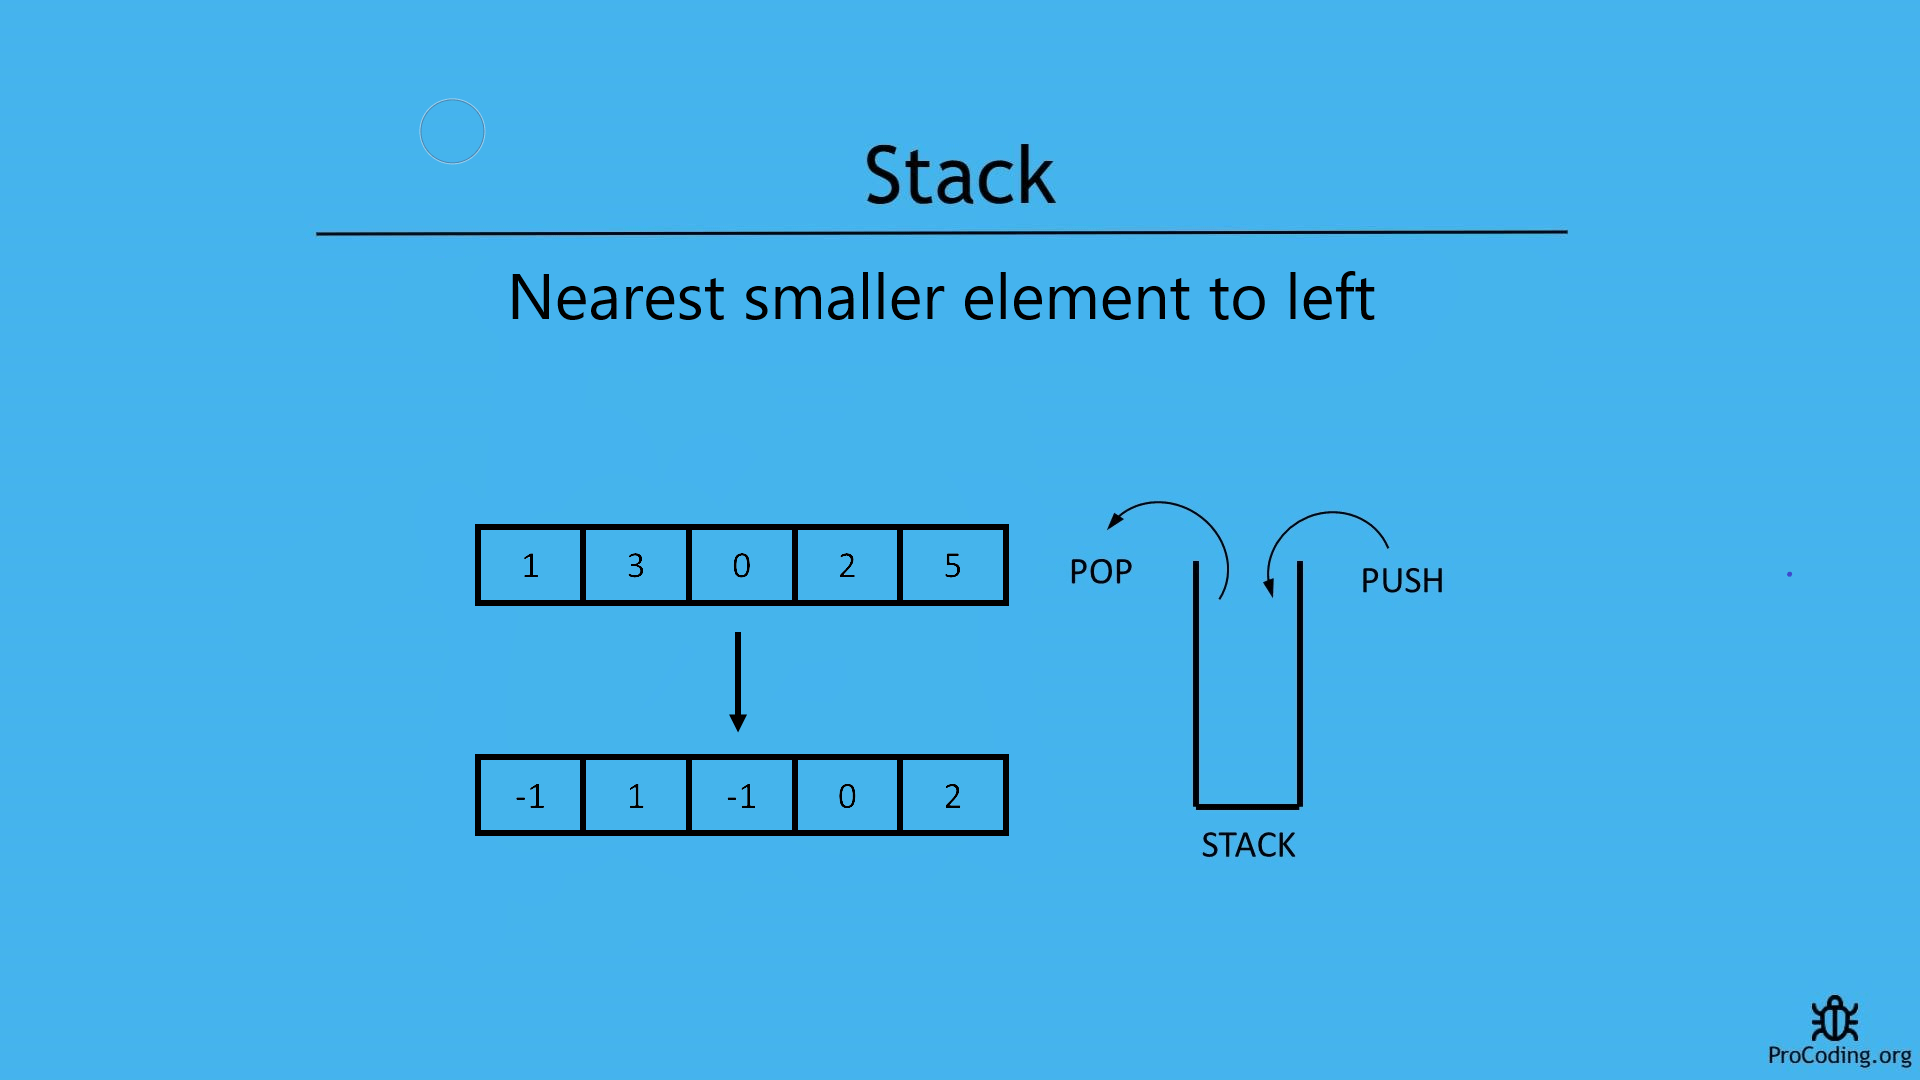 Nearest greatest element to left in stack